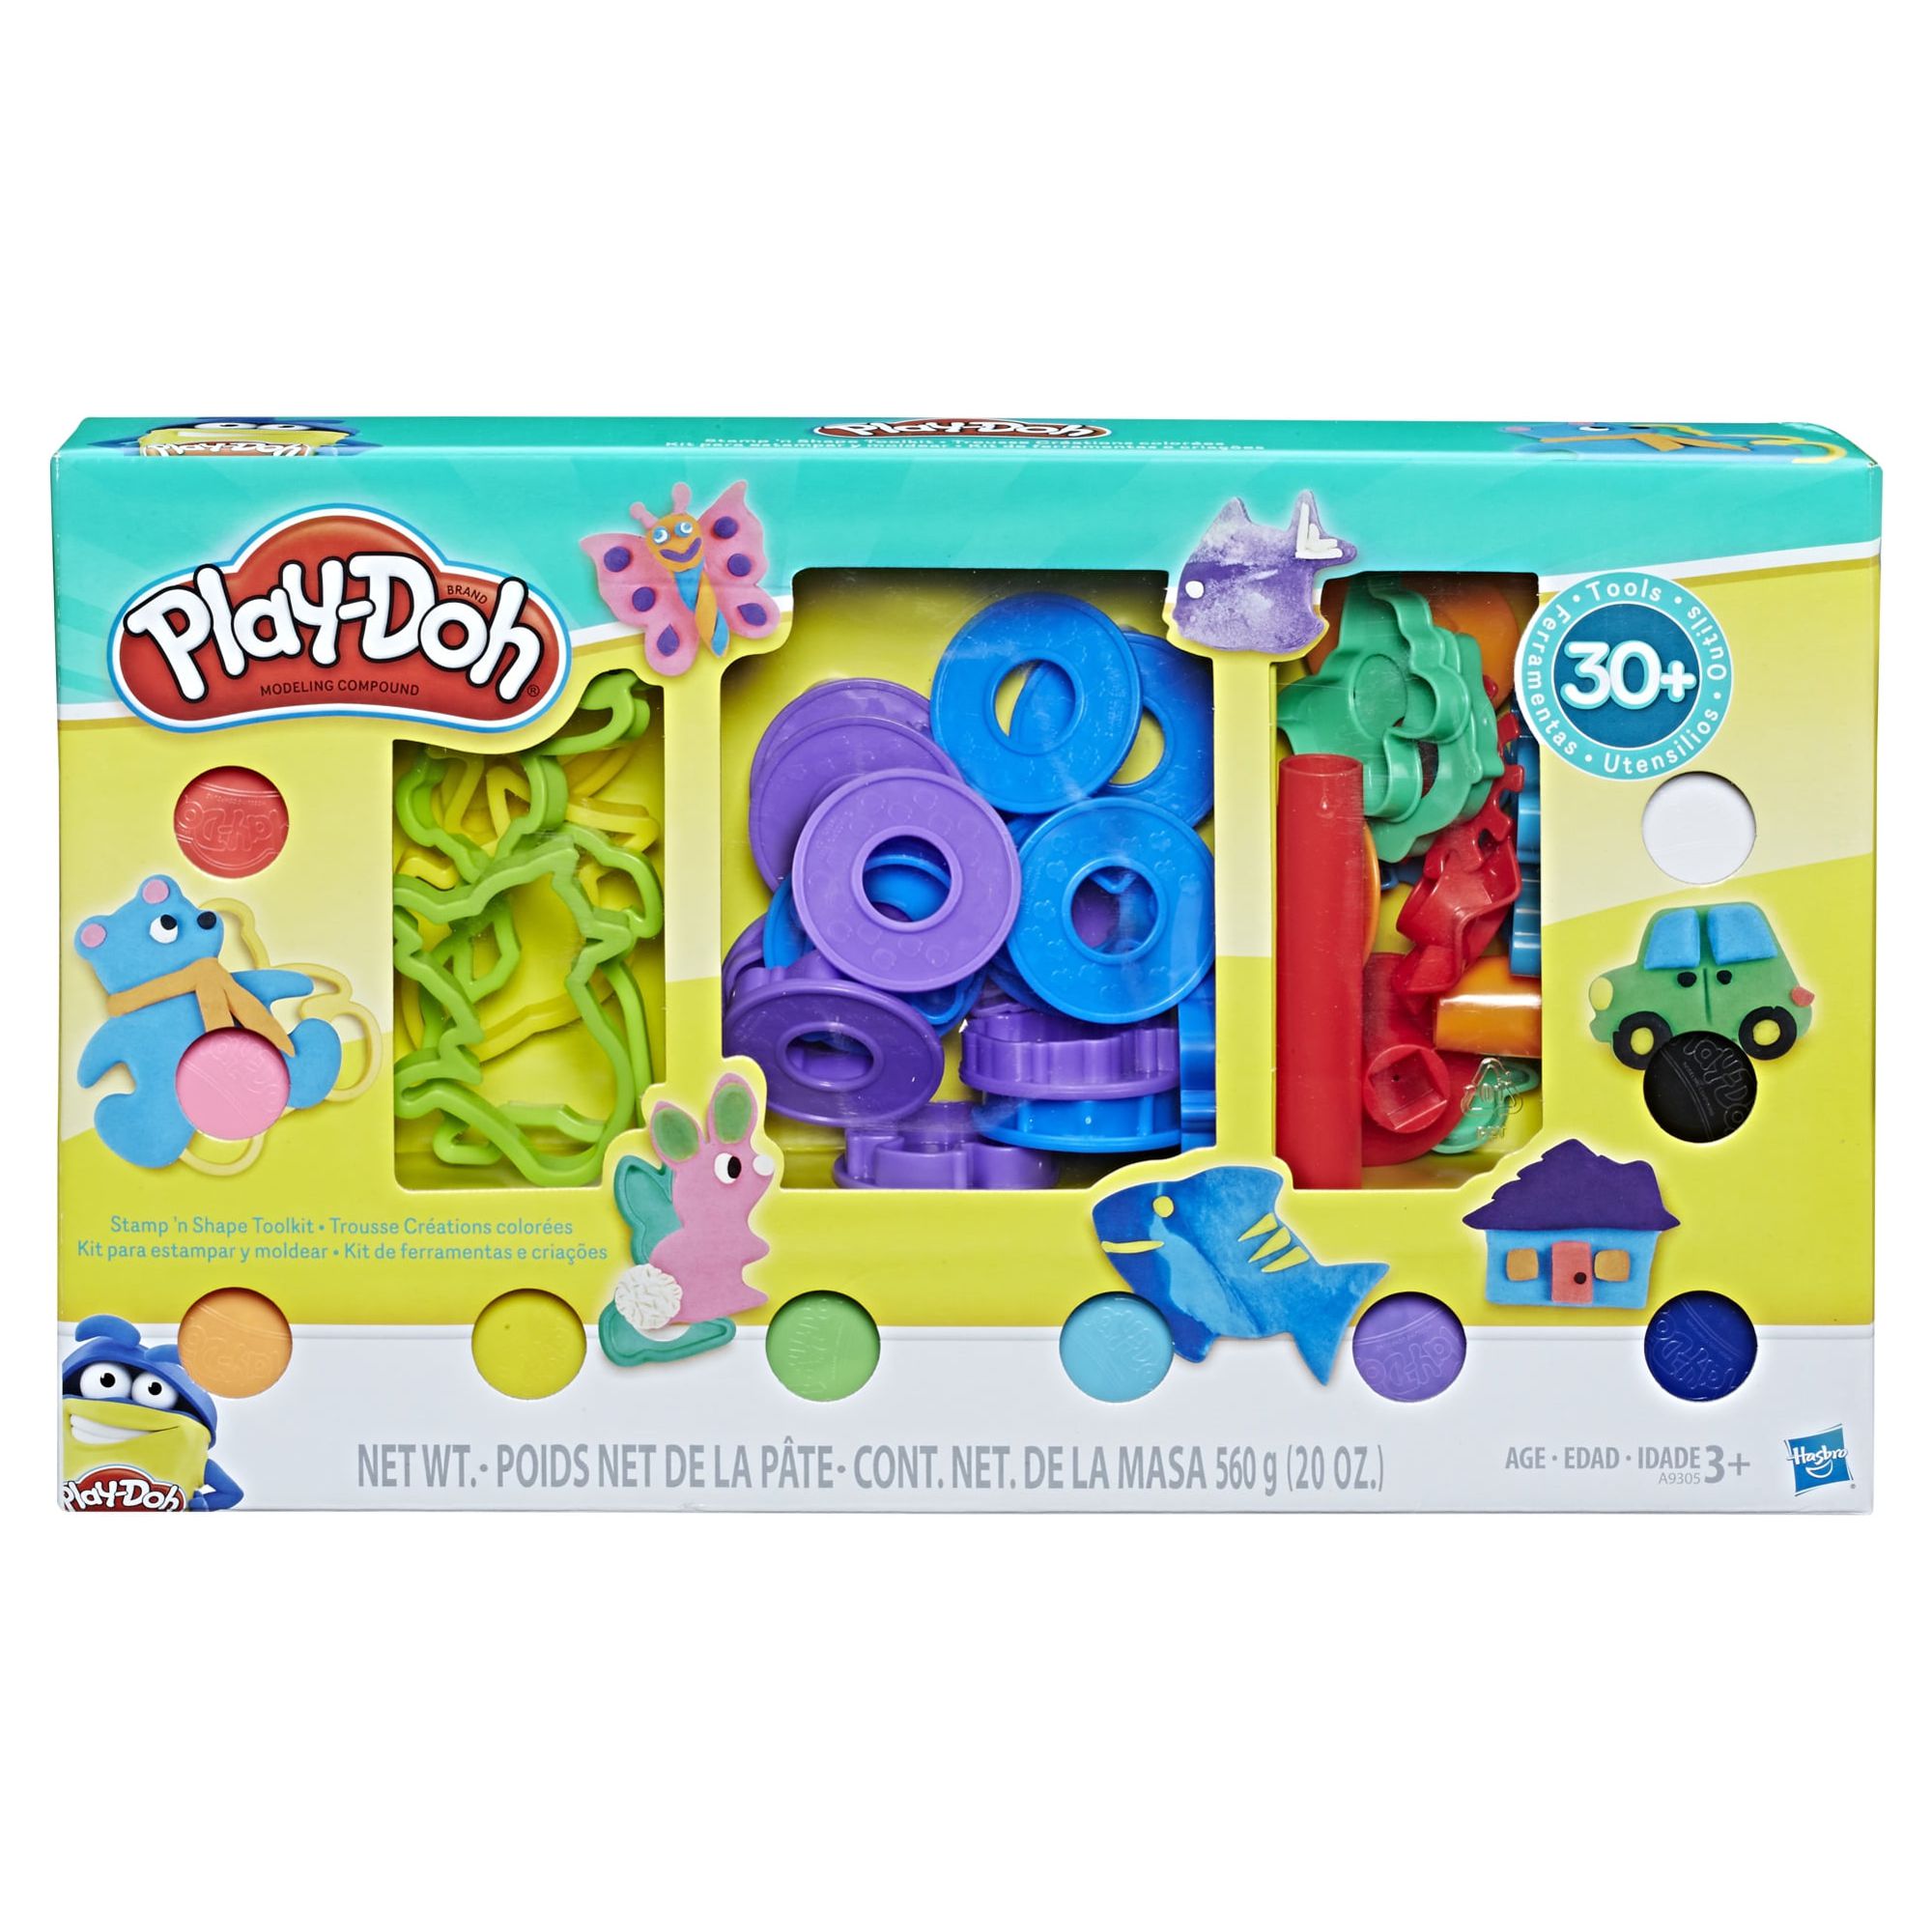 Play-Doh Modeling Compound Stamp ‘n Shape Play Dough Set - 10 Color (10 Piece), Only At Walmart - image 1 of 8